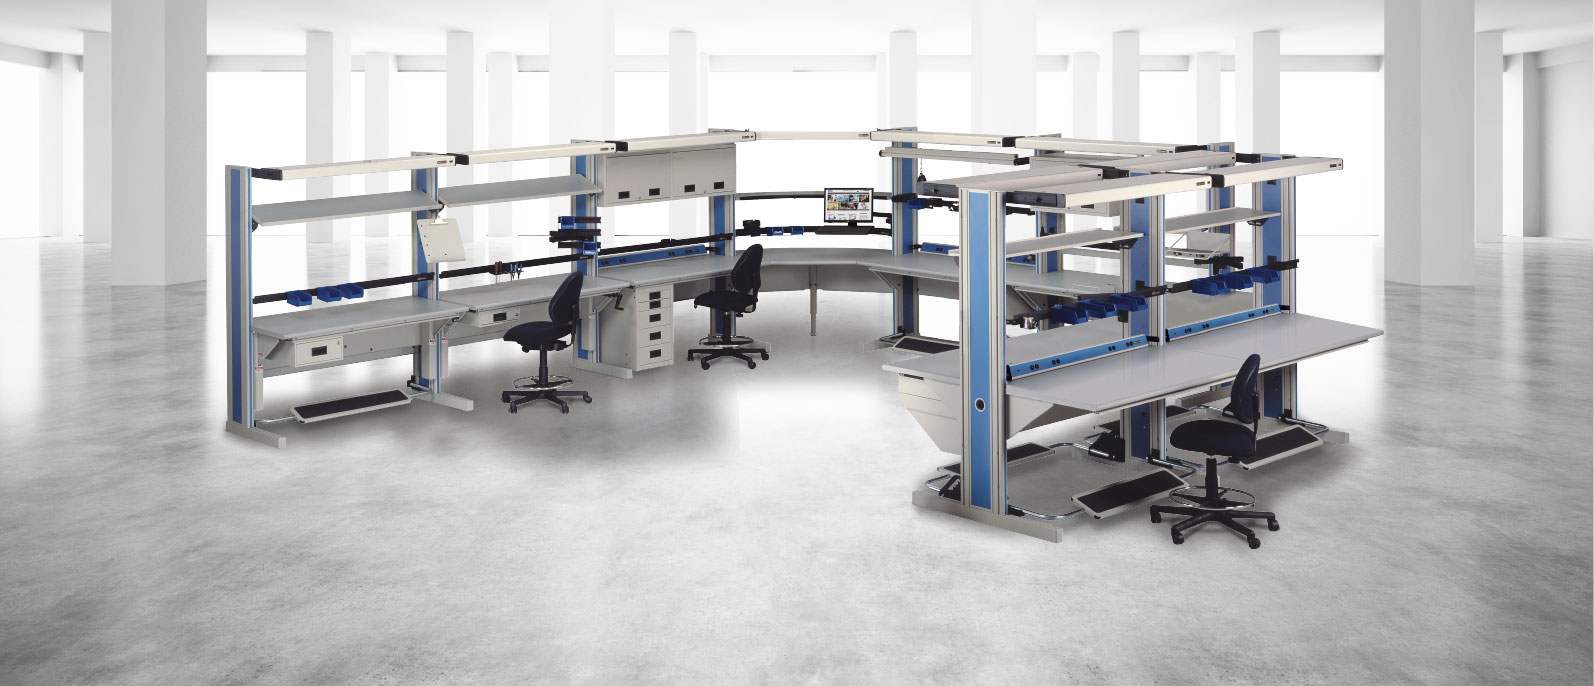 dimension 4 industrial workstations